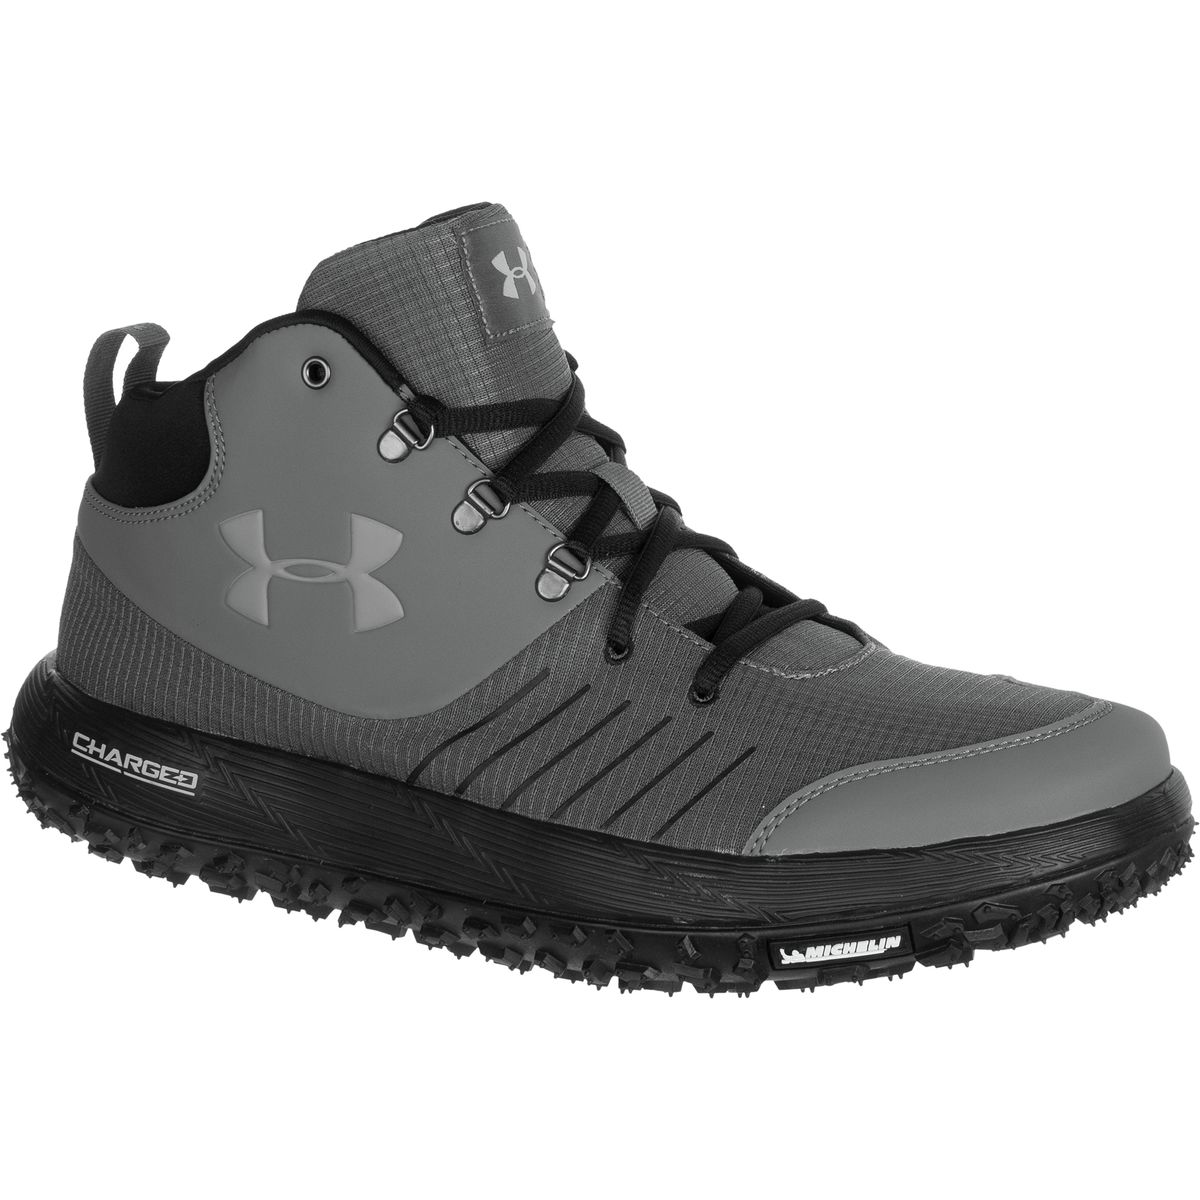 Under Armour Overdrive Fat Tire Hiking Boot - Men's